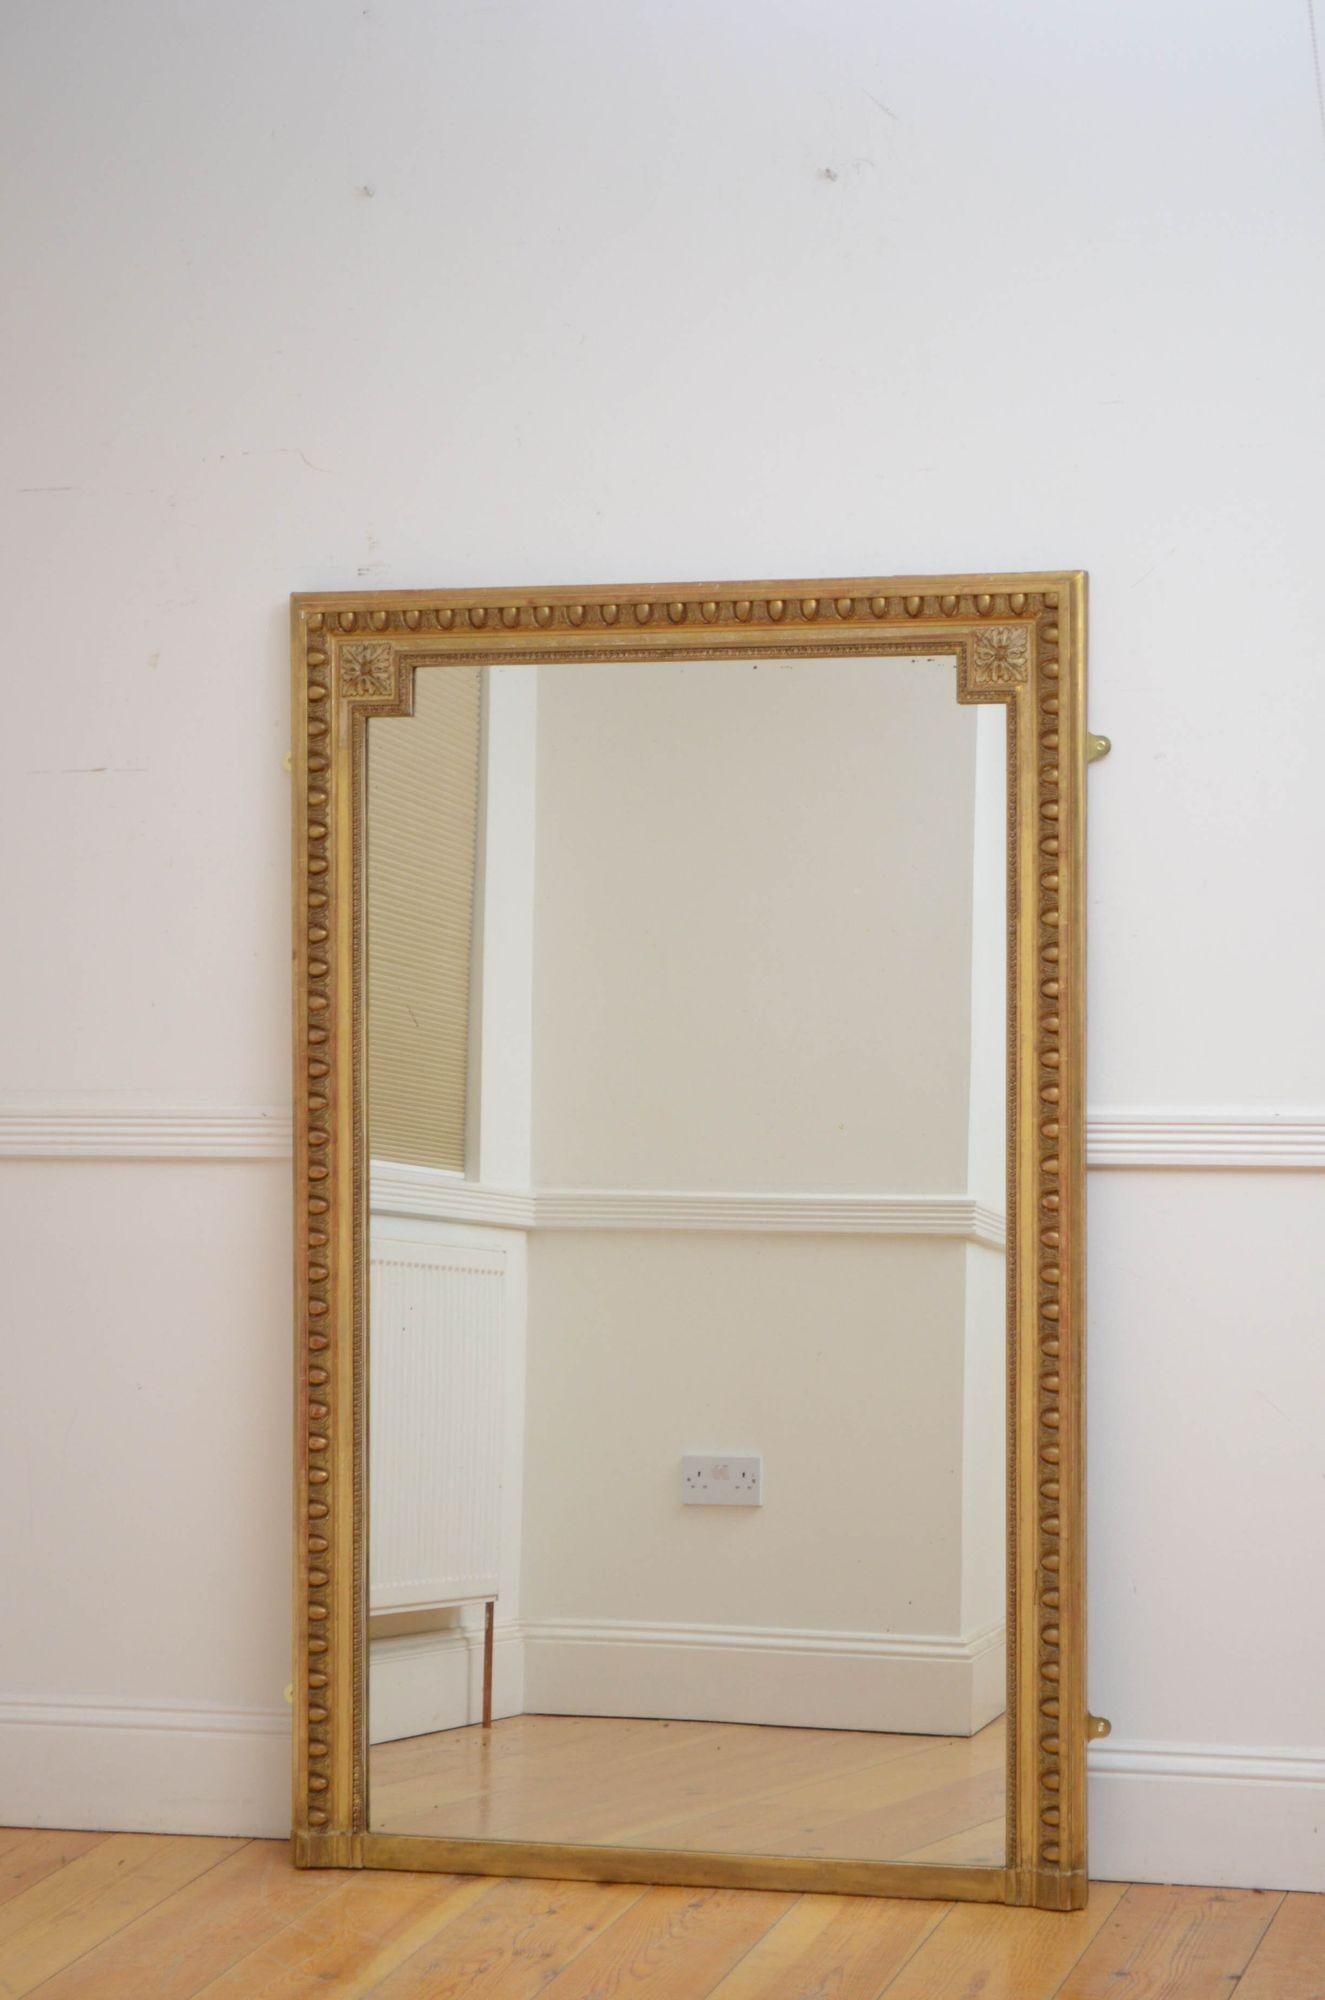 Sn5264 Simple and elegant 19th century gilded mirror, having original slightly foxed glass in egg and dart carved, moulded and gilded frame with acanthus leaf decorated top corners. This antique mirror retains its original gilt, glass and